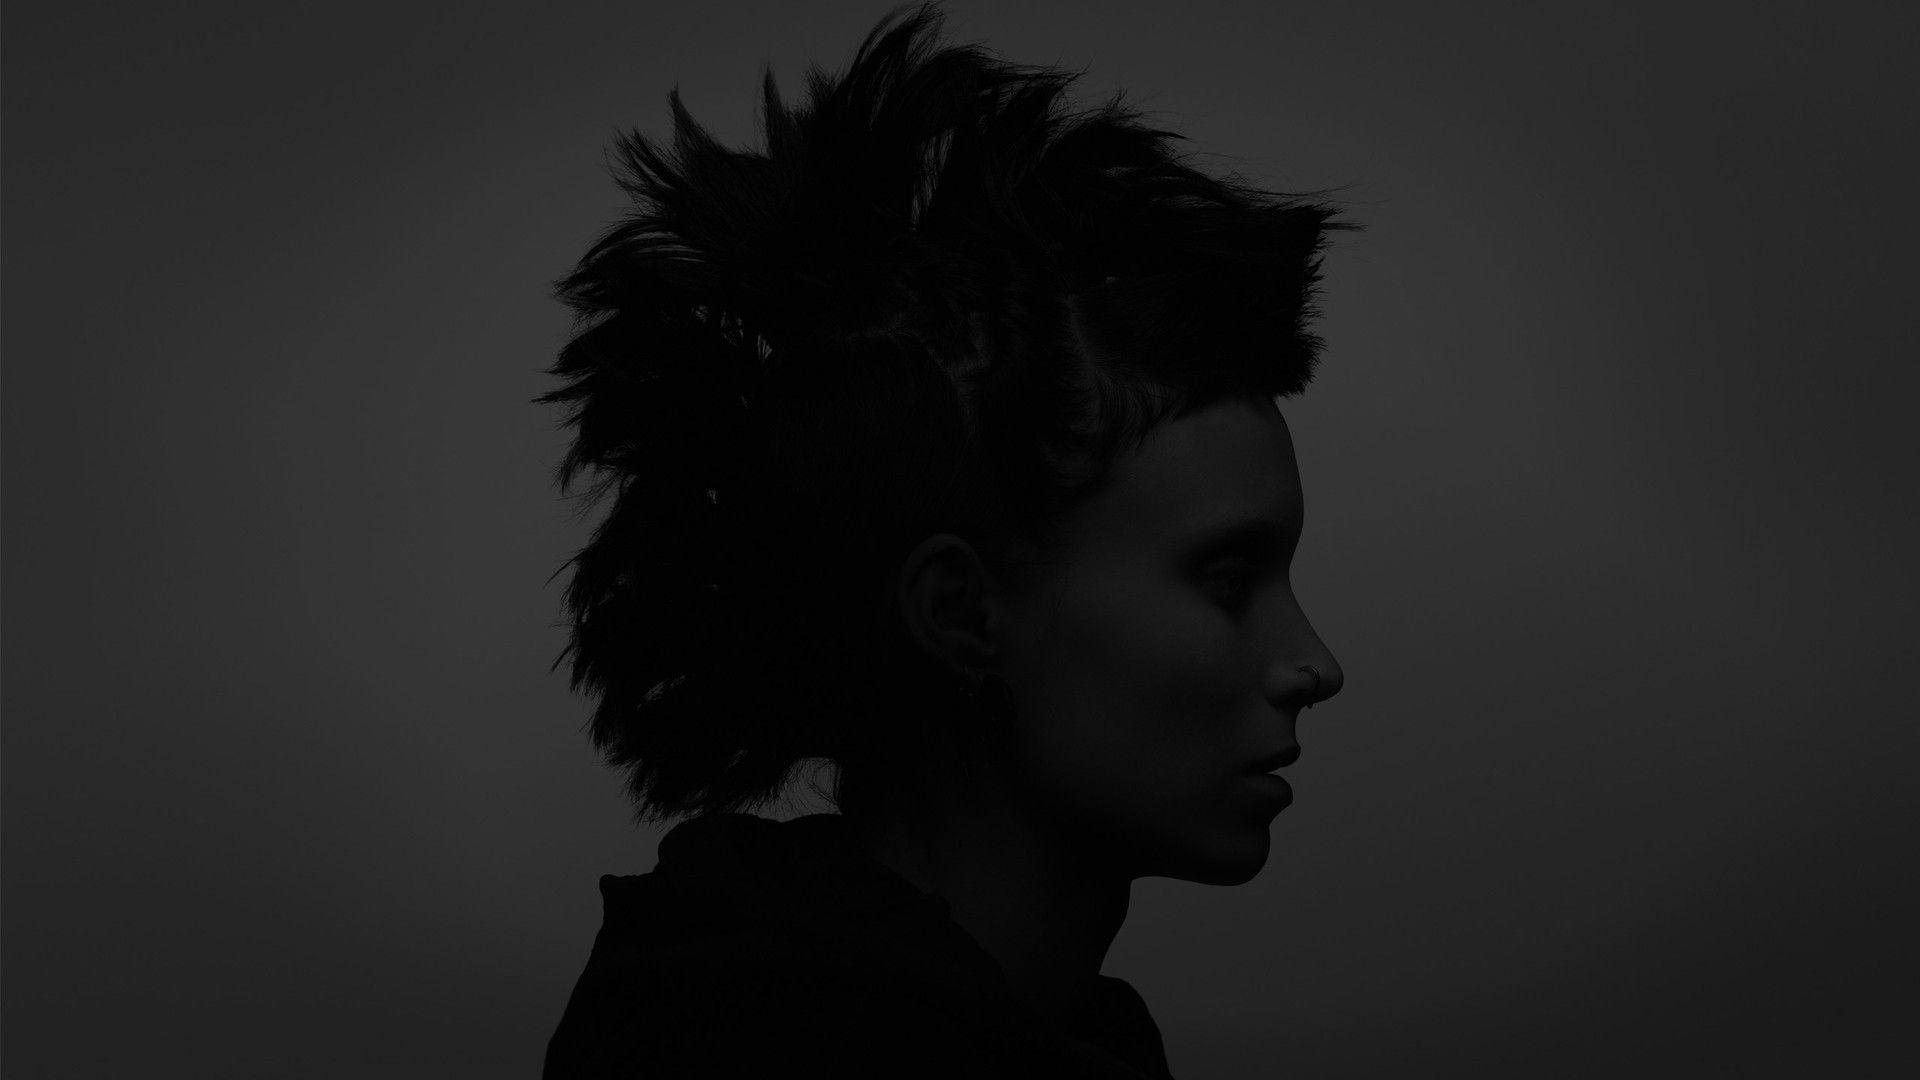 The Girl With The Dragon Tattoo, Monochrome, Rooney Mara